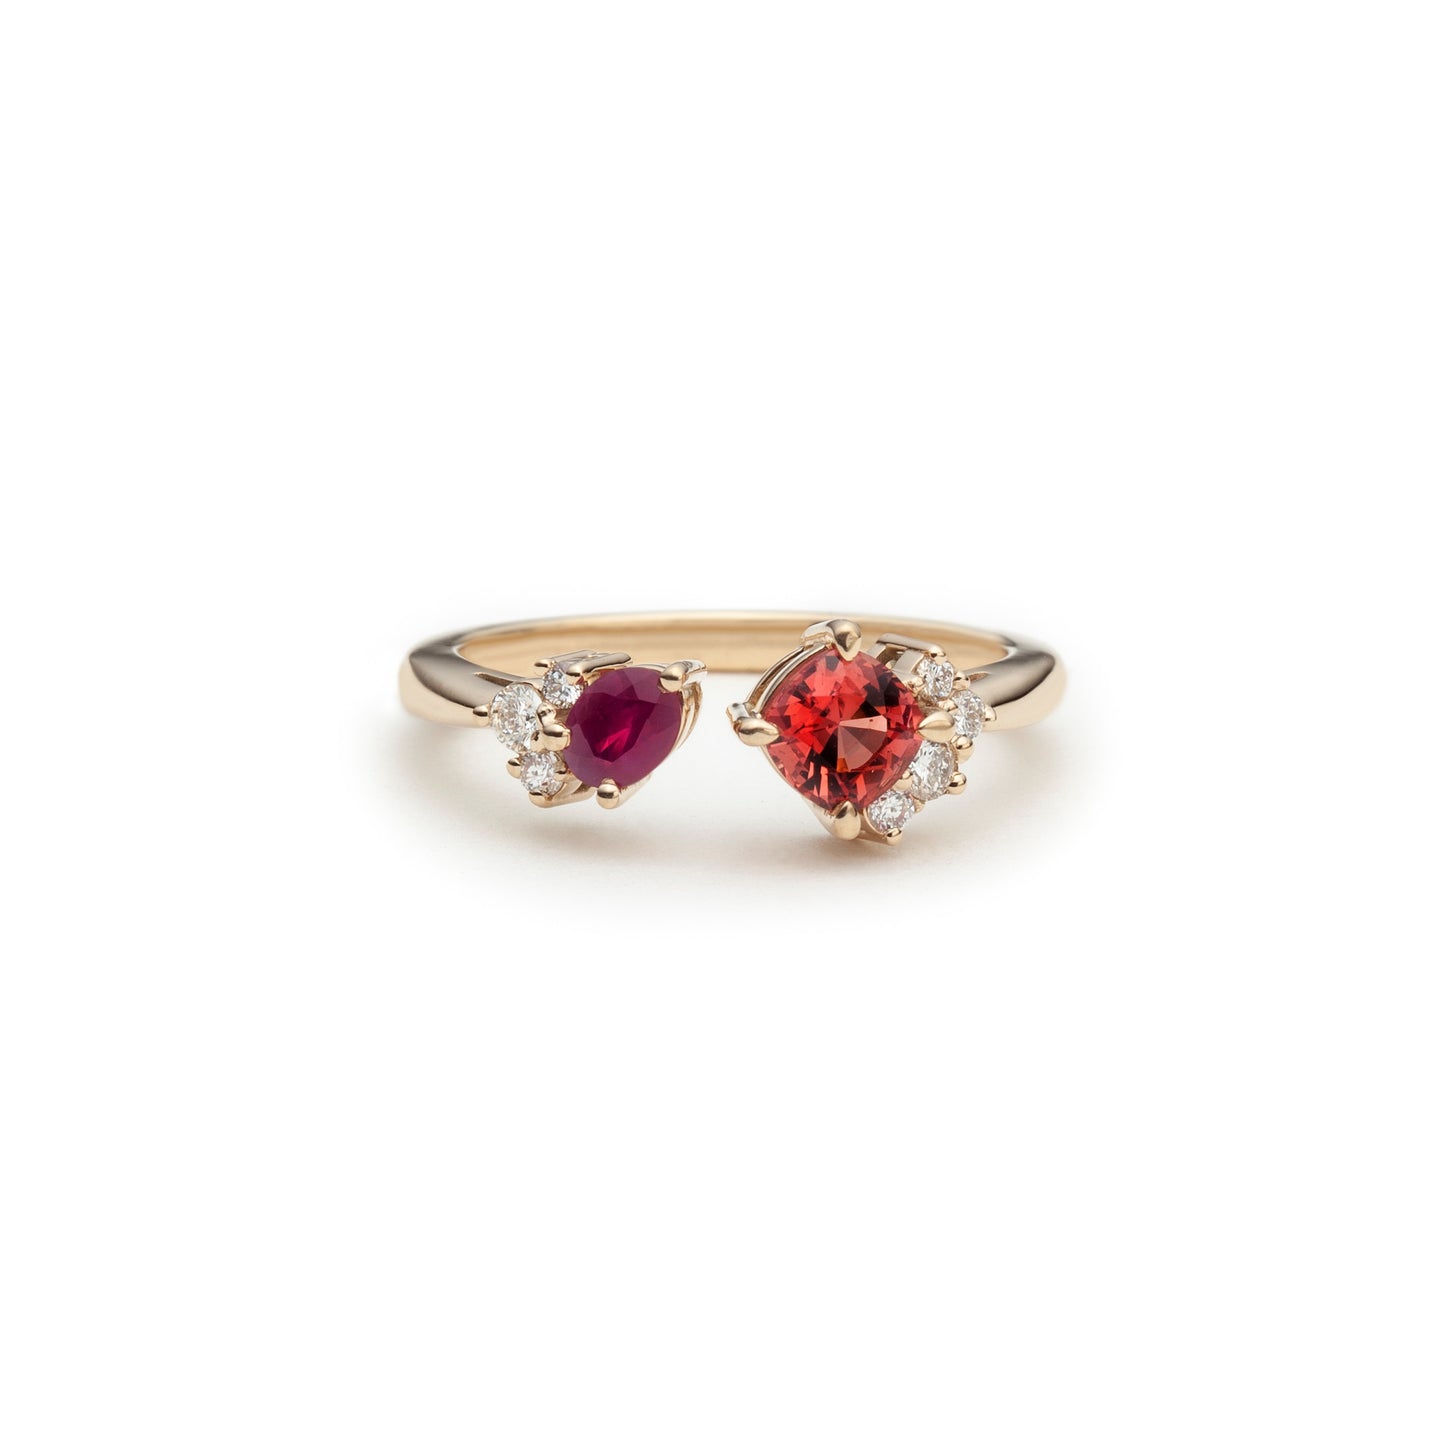 One of a kind toi & moi ruby, peach spinel and diamond ring